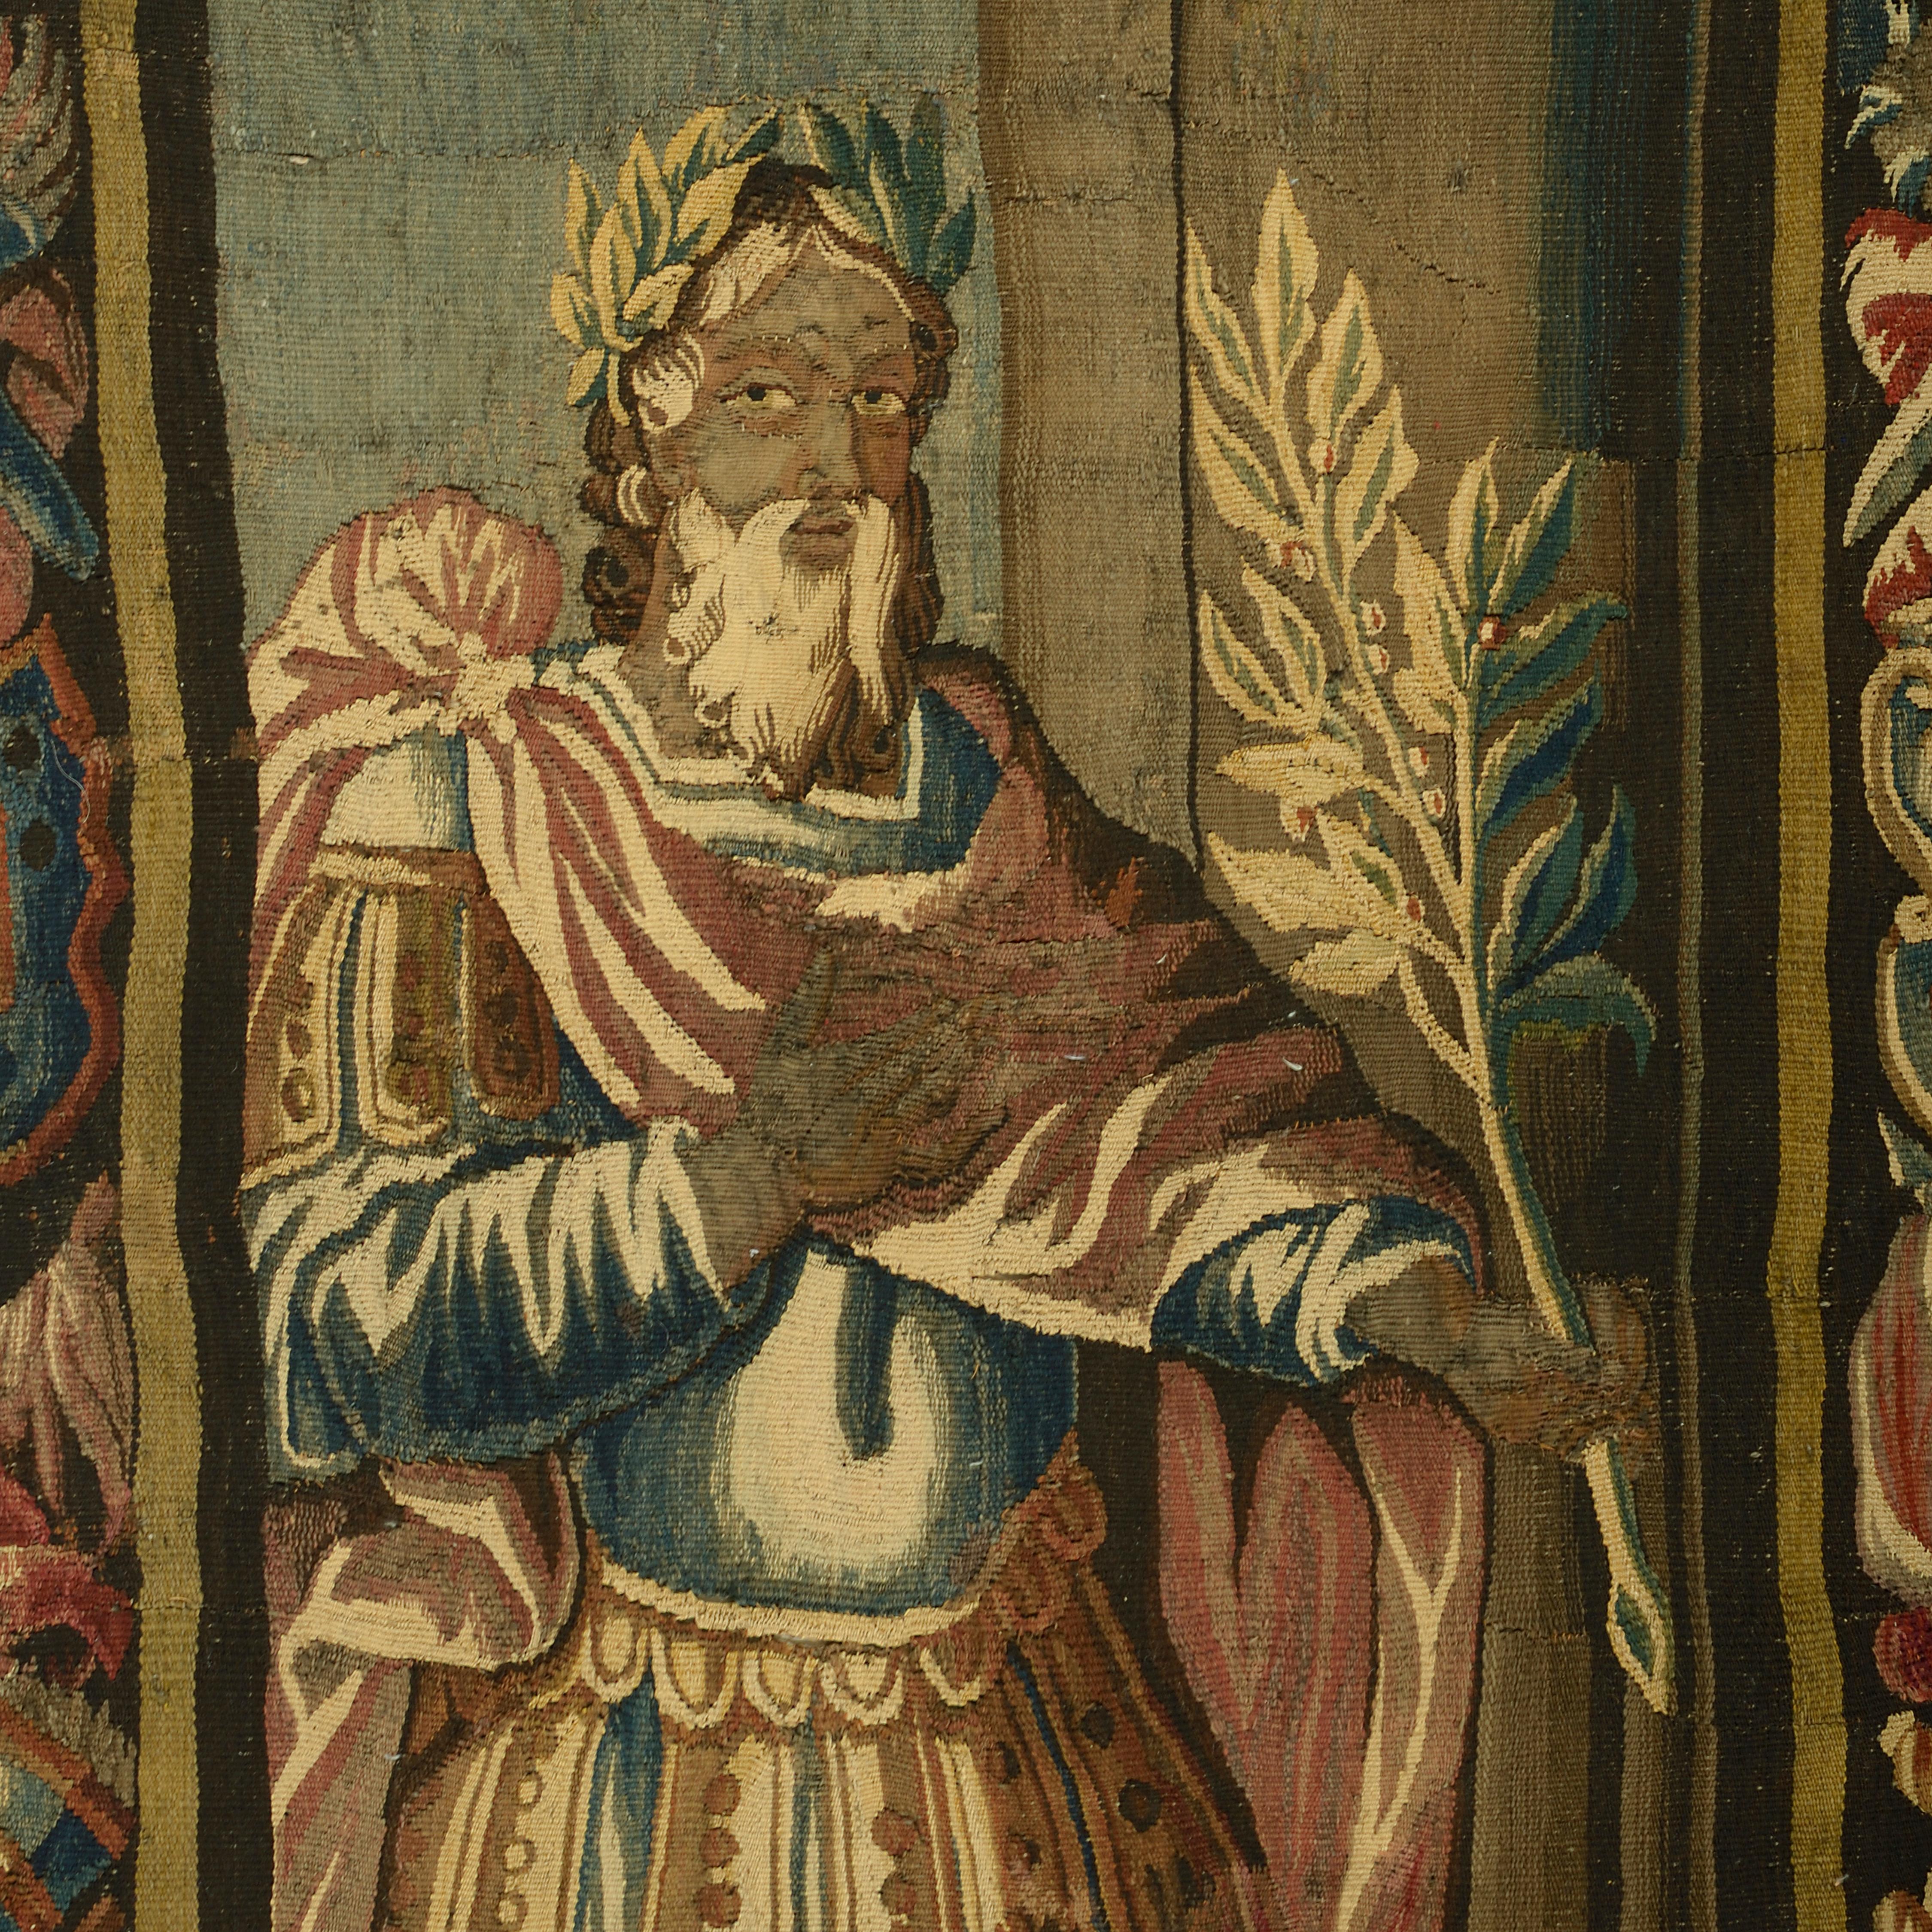 An 18th century portrait tapestry, depicting a Roman emperor wearing a laurel wreath, holding an olive branch, signed Manufacture Royal Aubusson.